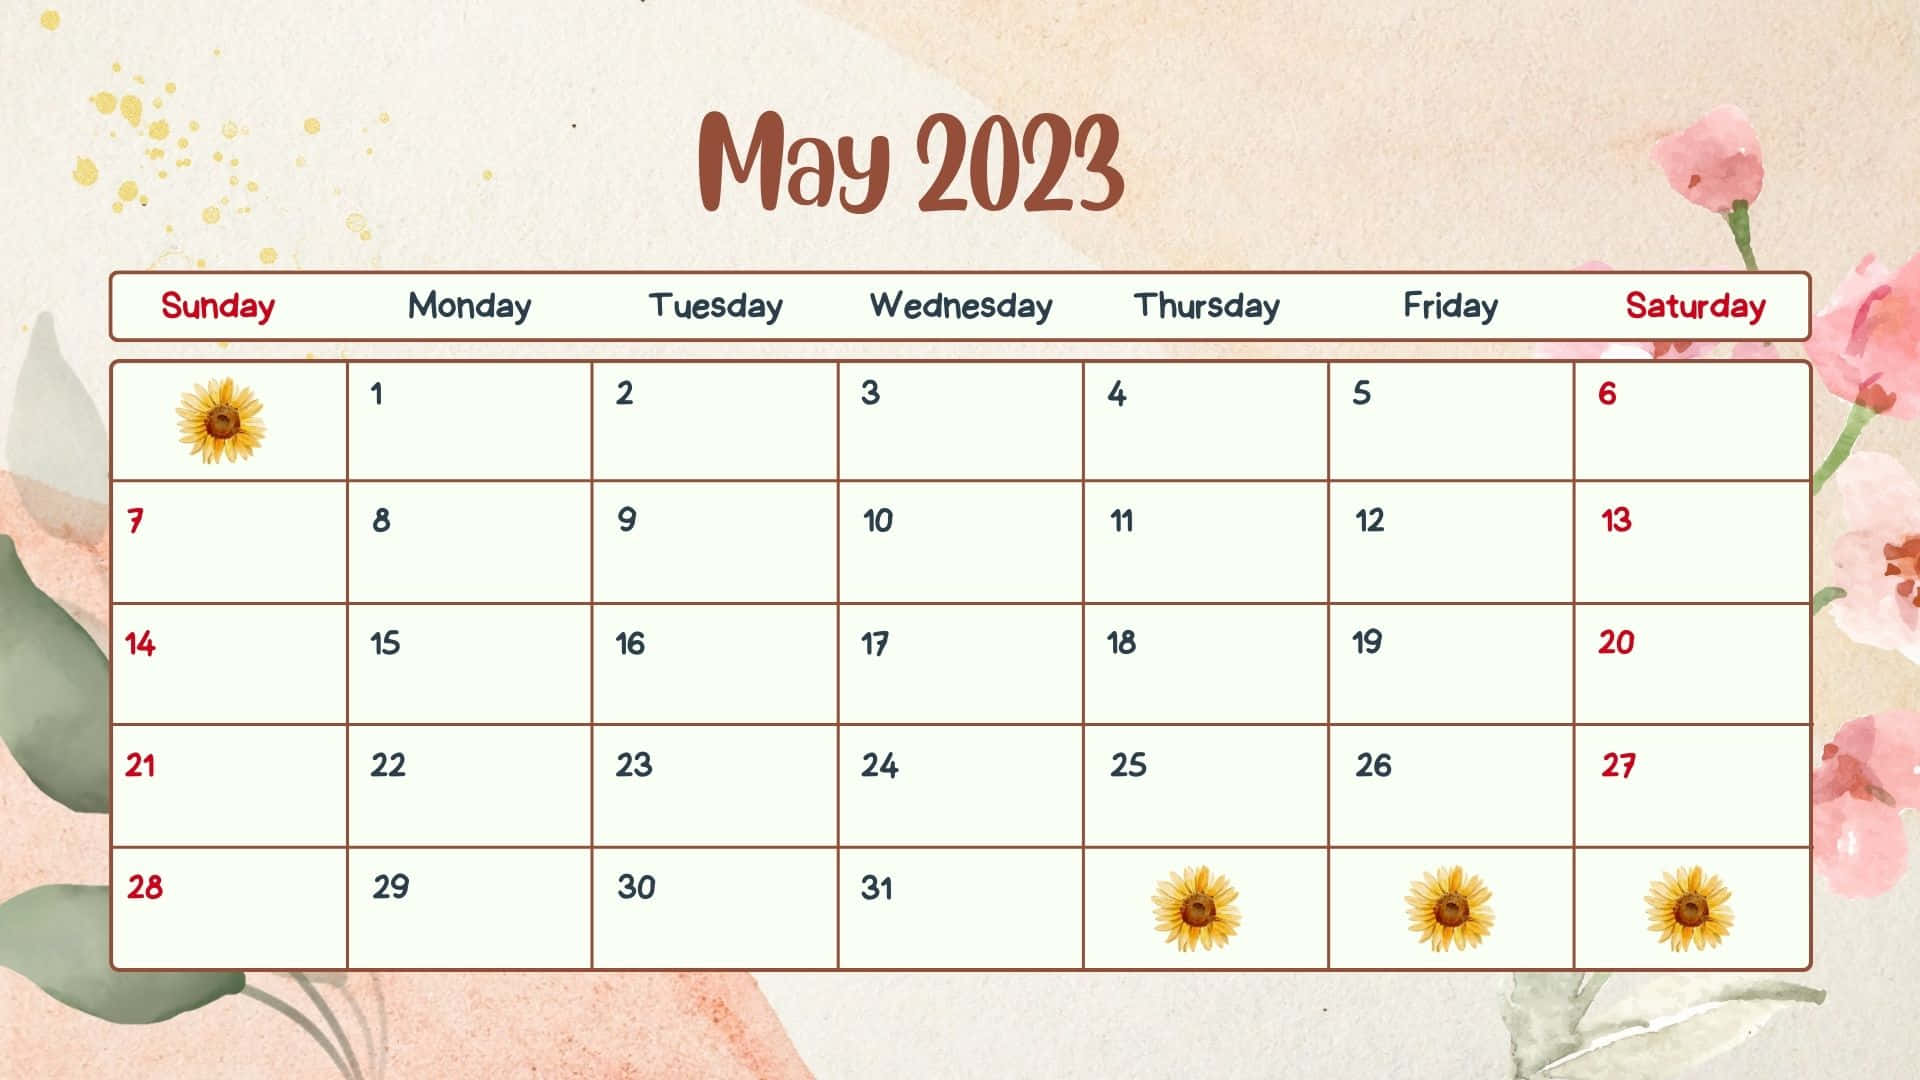 Stay organized with the May 2023 calendar Wallpaper